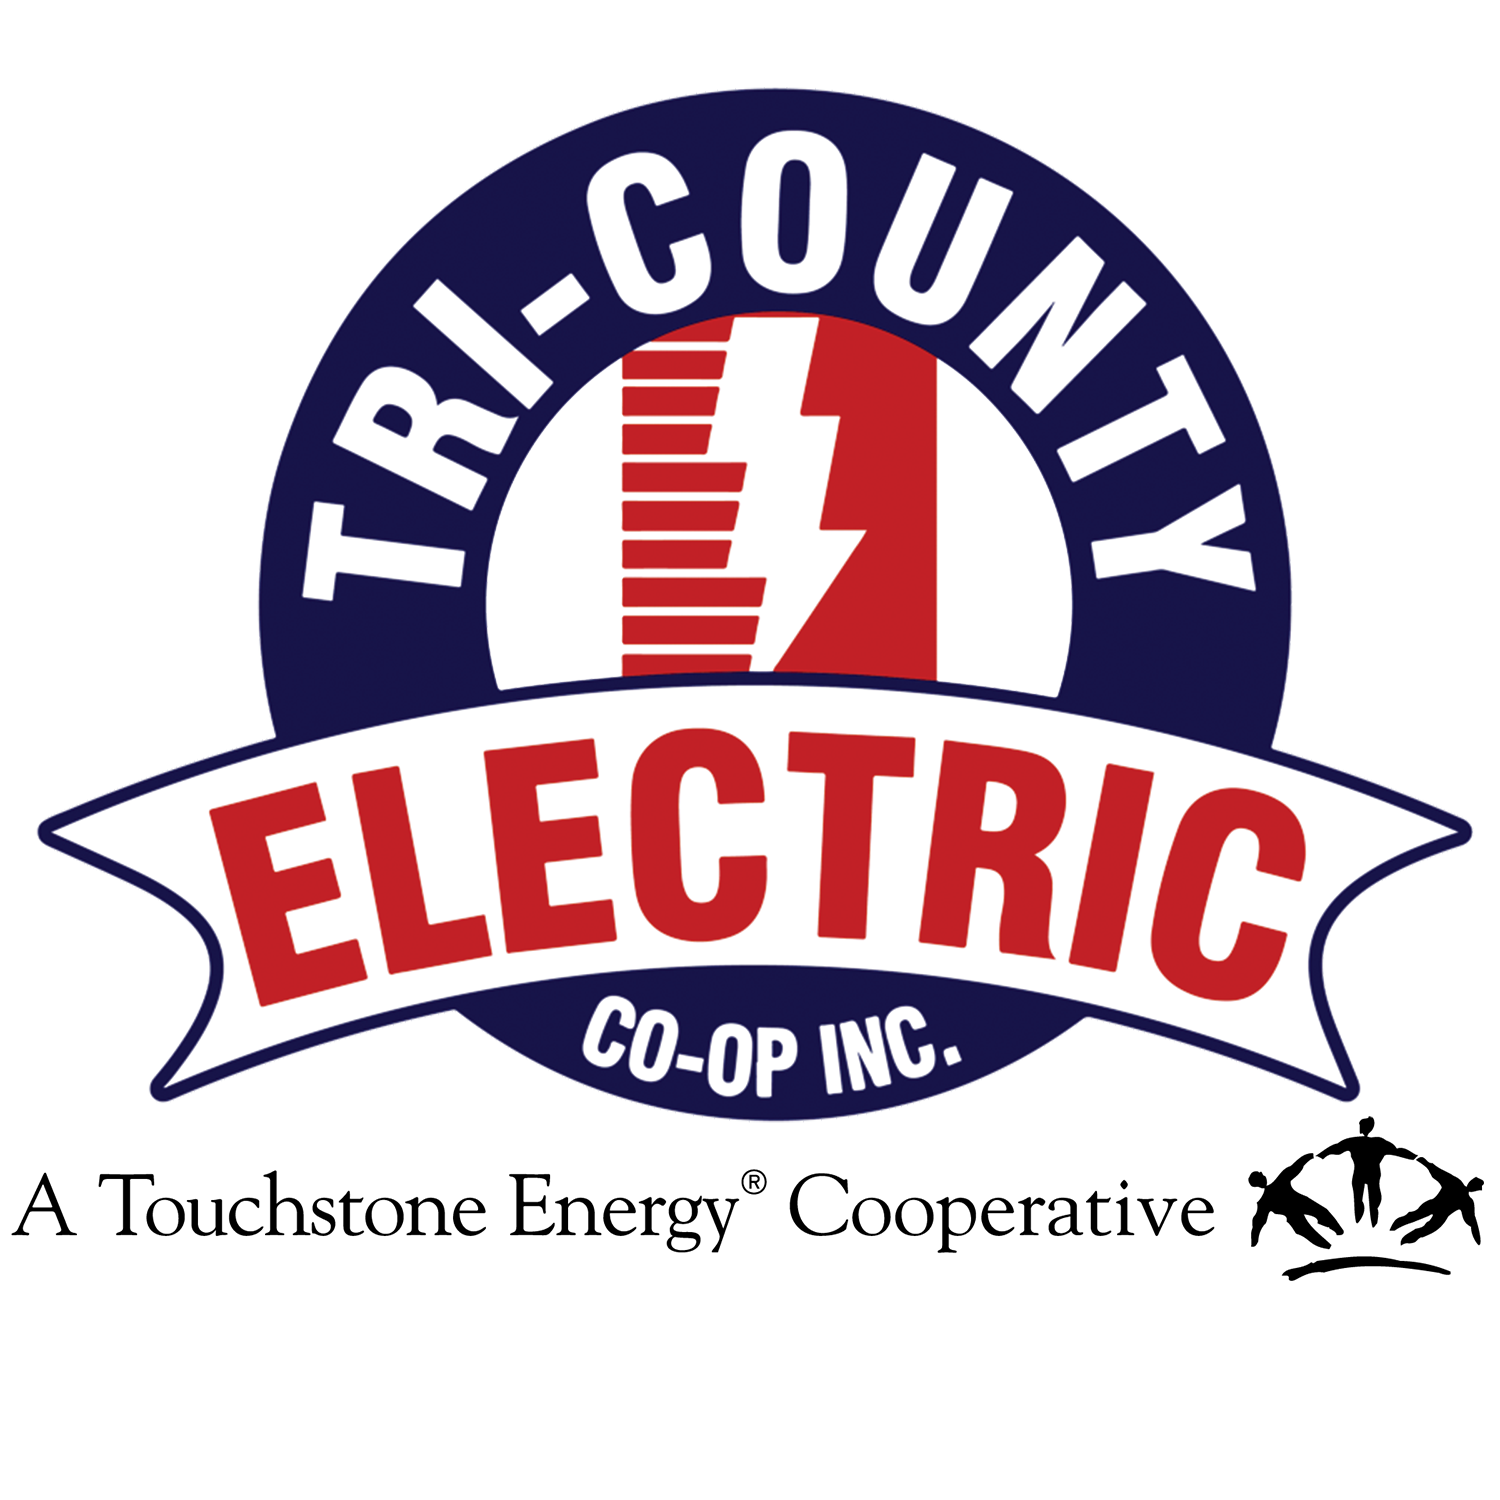 Tri County Electric Outage Map